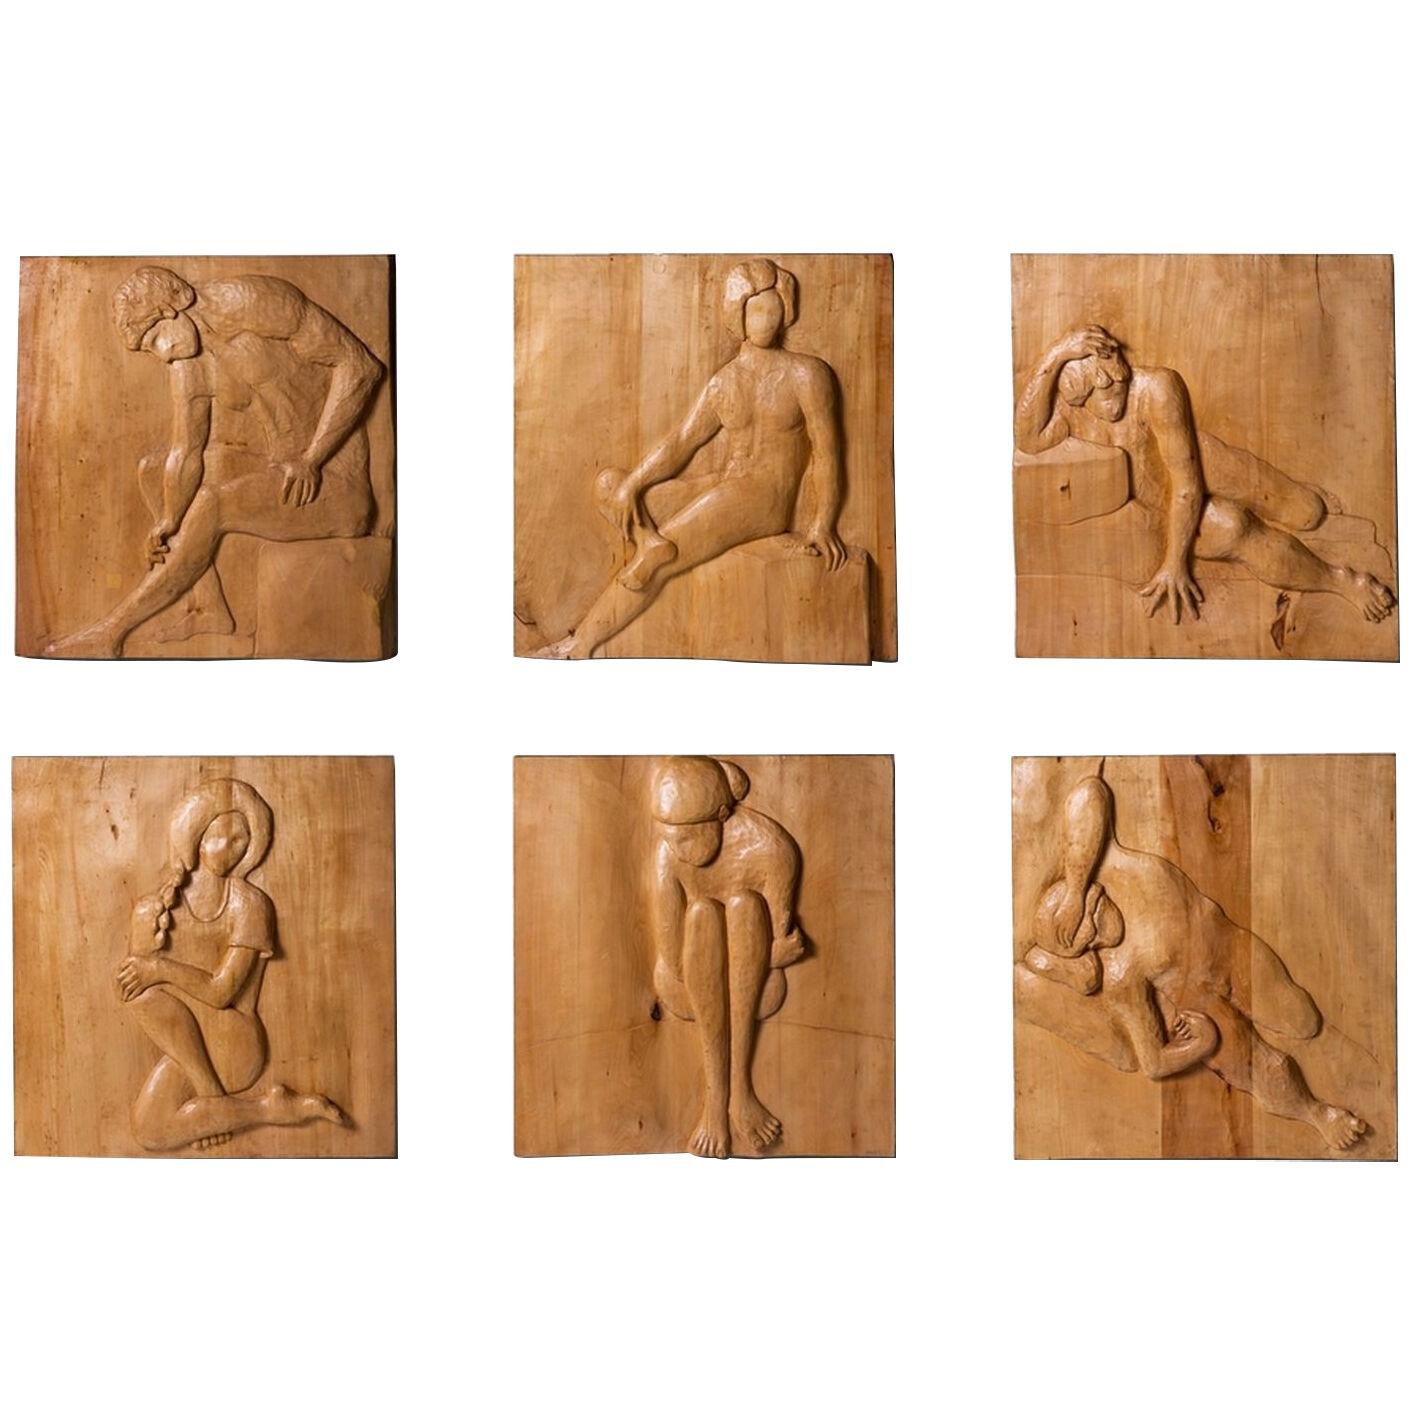 Six decorative panels, carved wood in low relief